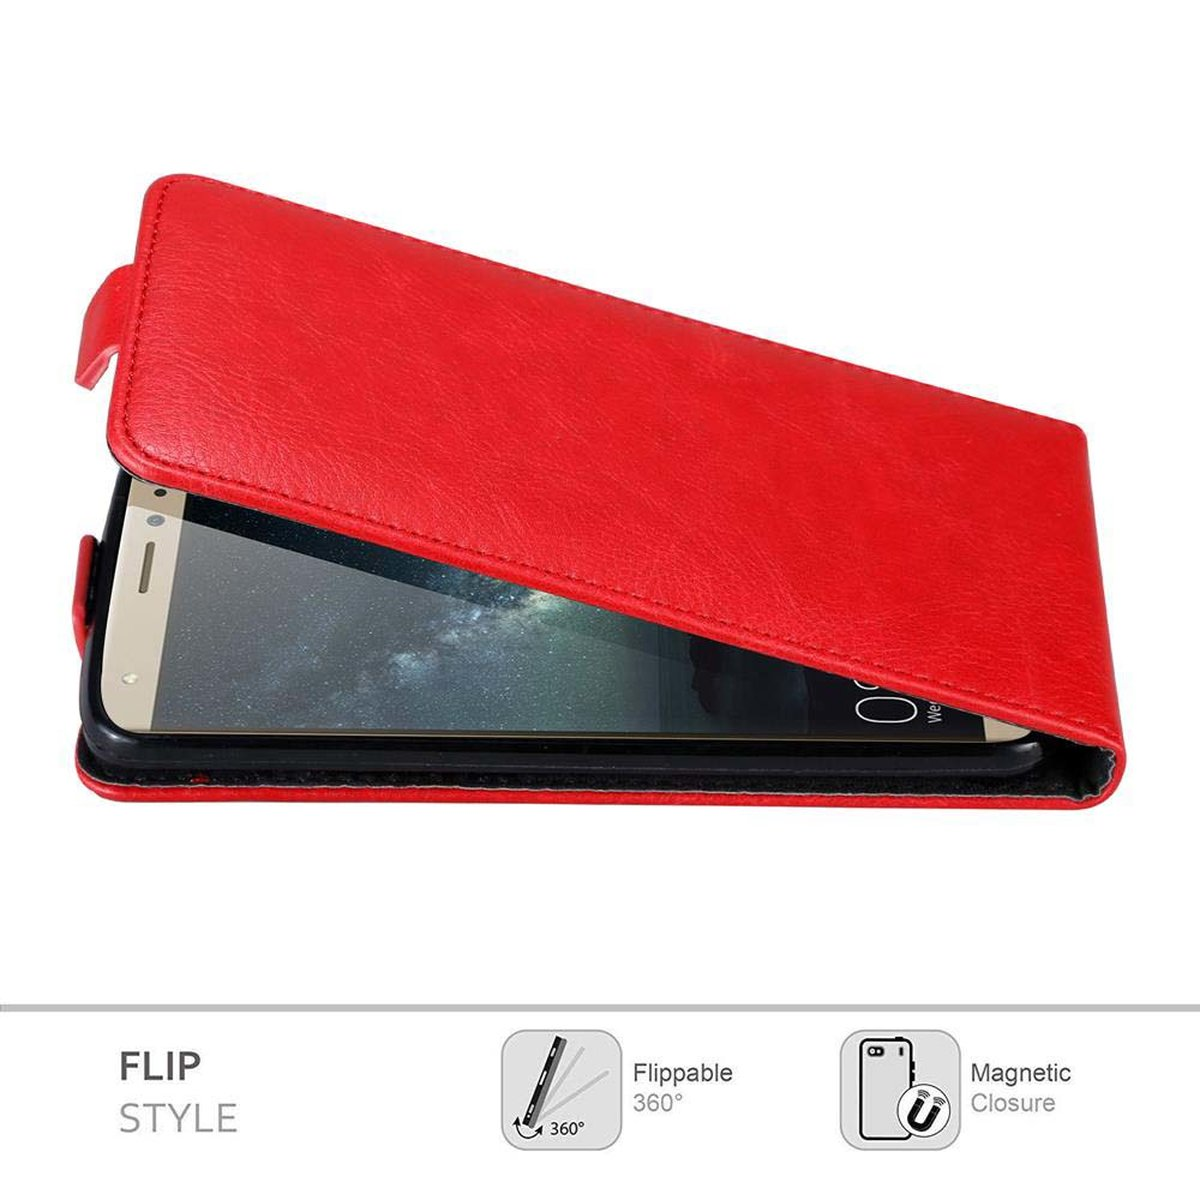 ROT Flip CADORABO Huawei, Style, S, Flip MATE Cover, Hülle im APFEL